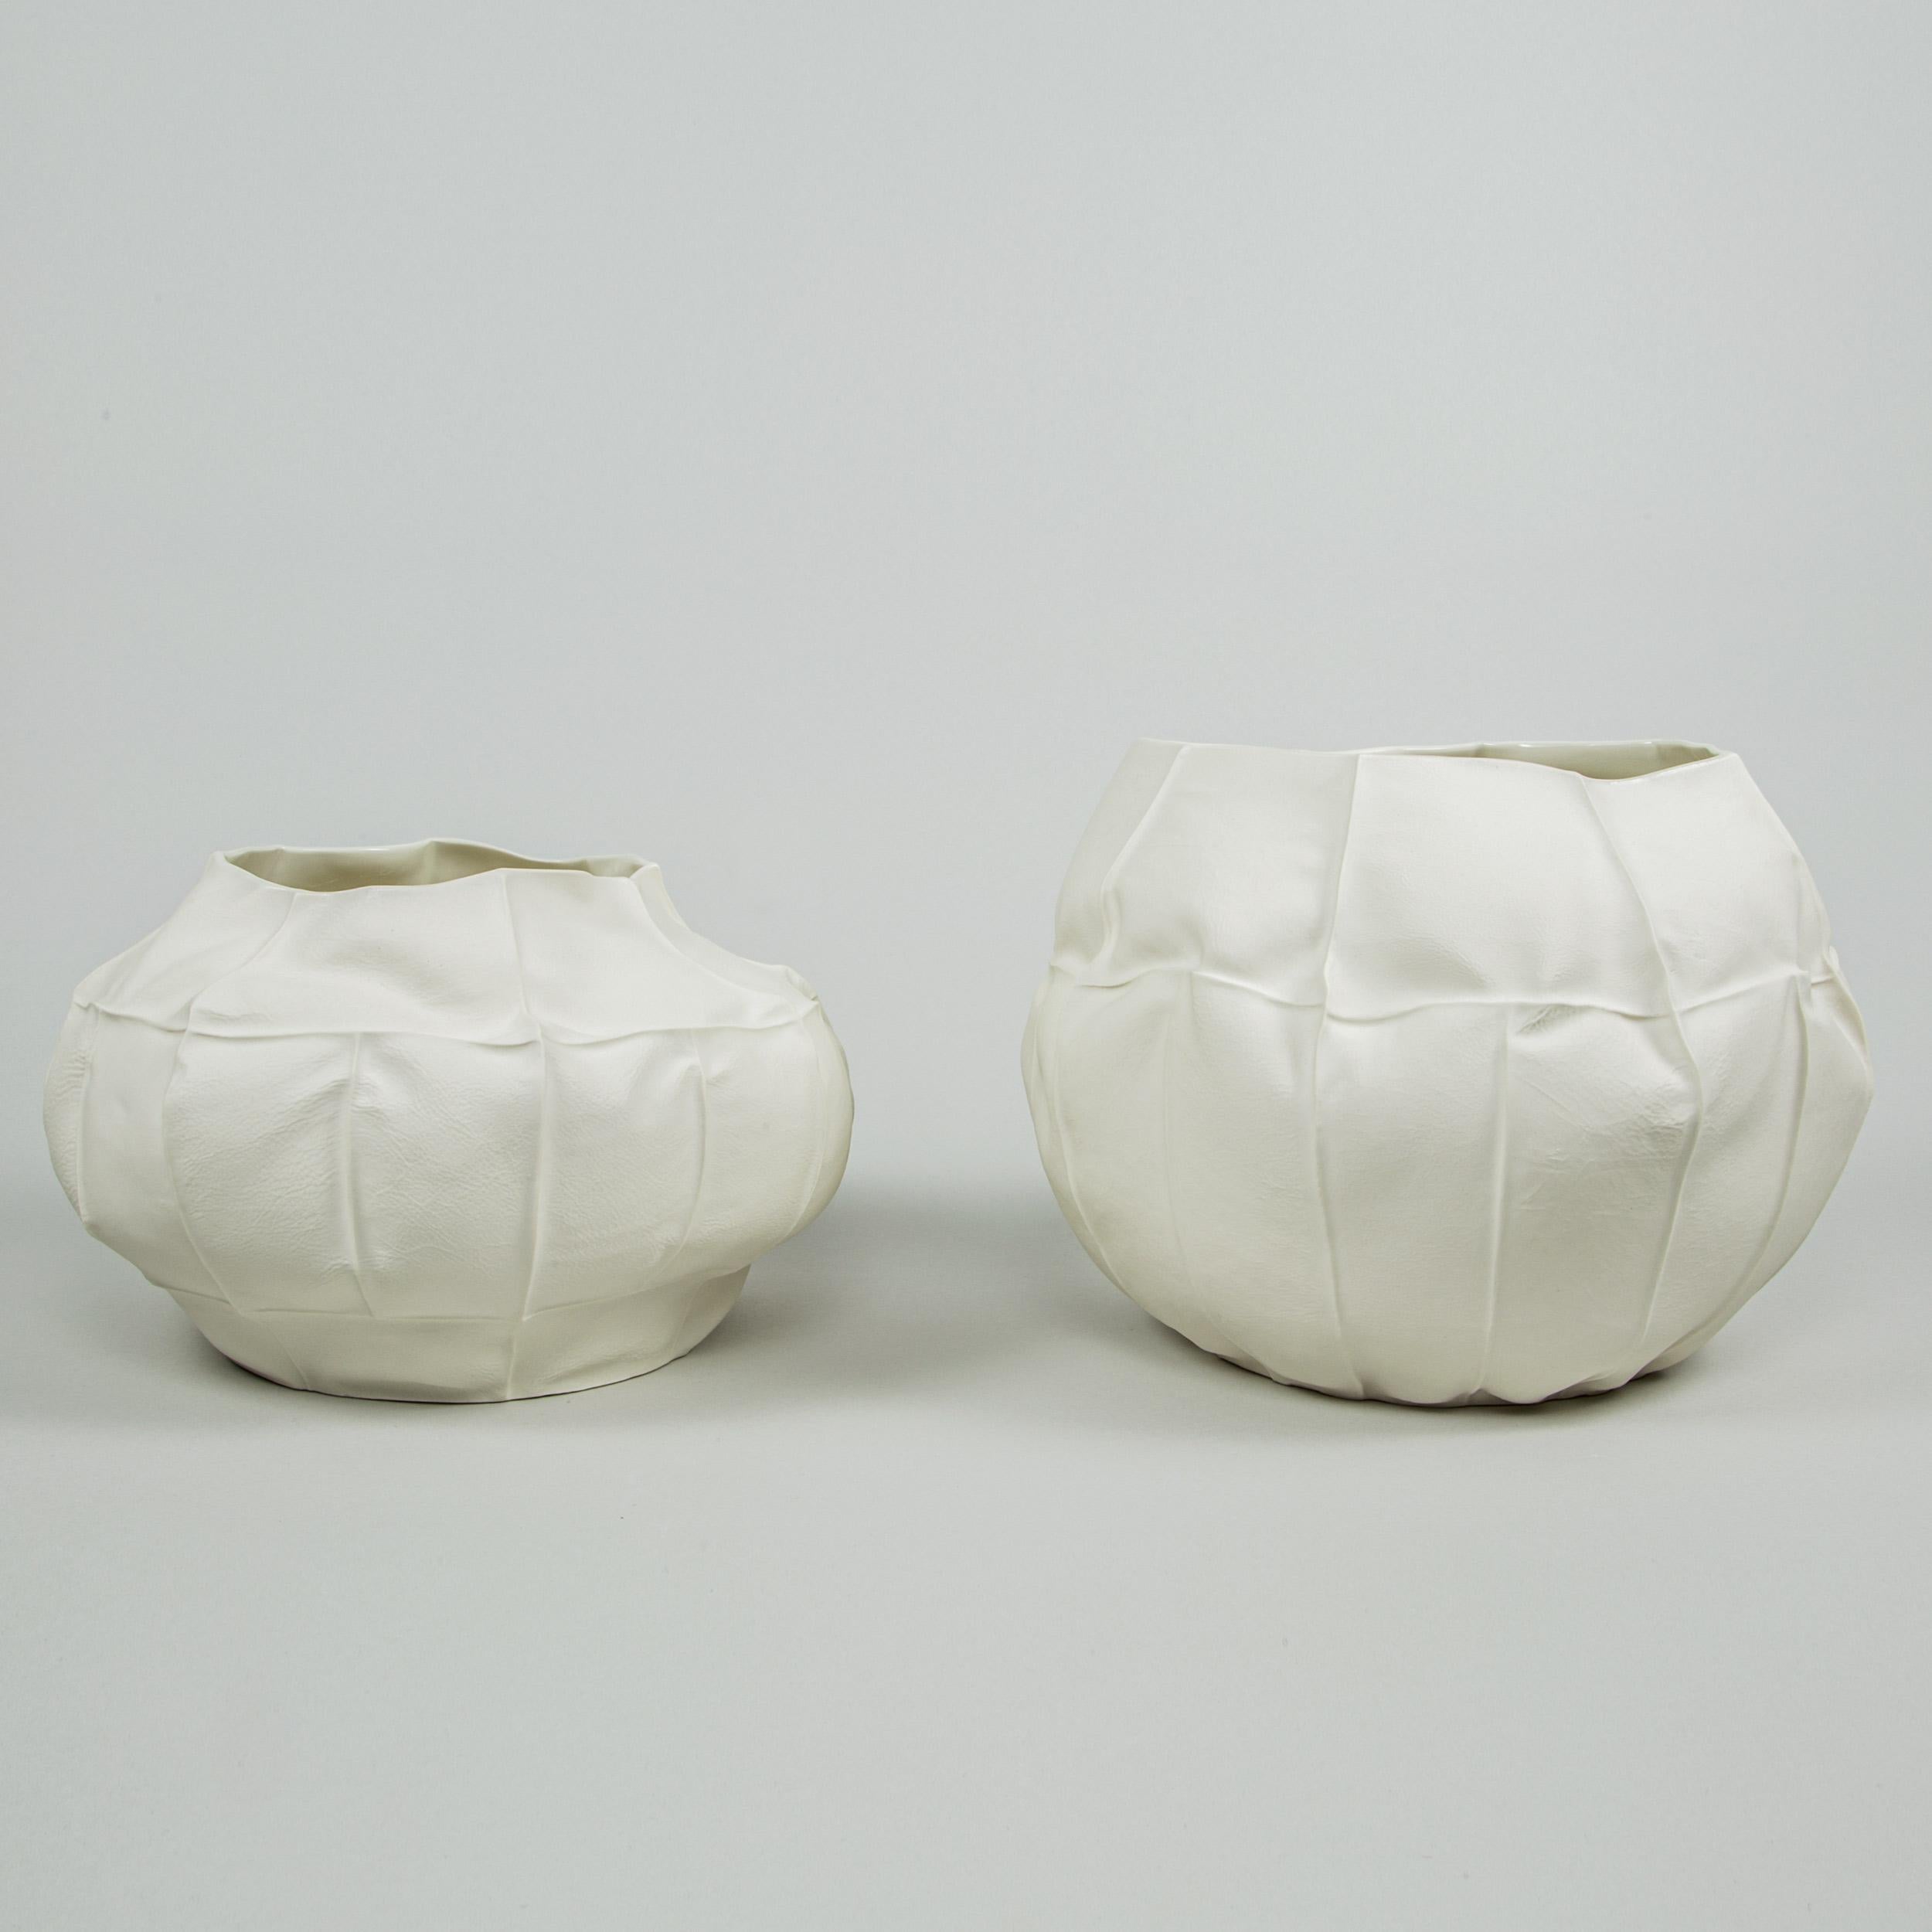 Hand-Crafted Organic White Ceramic Kawa Vessel, Large 01, Leather Cast Porcelain Vase For Sale